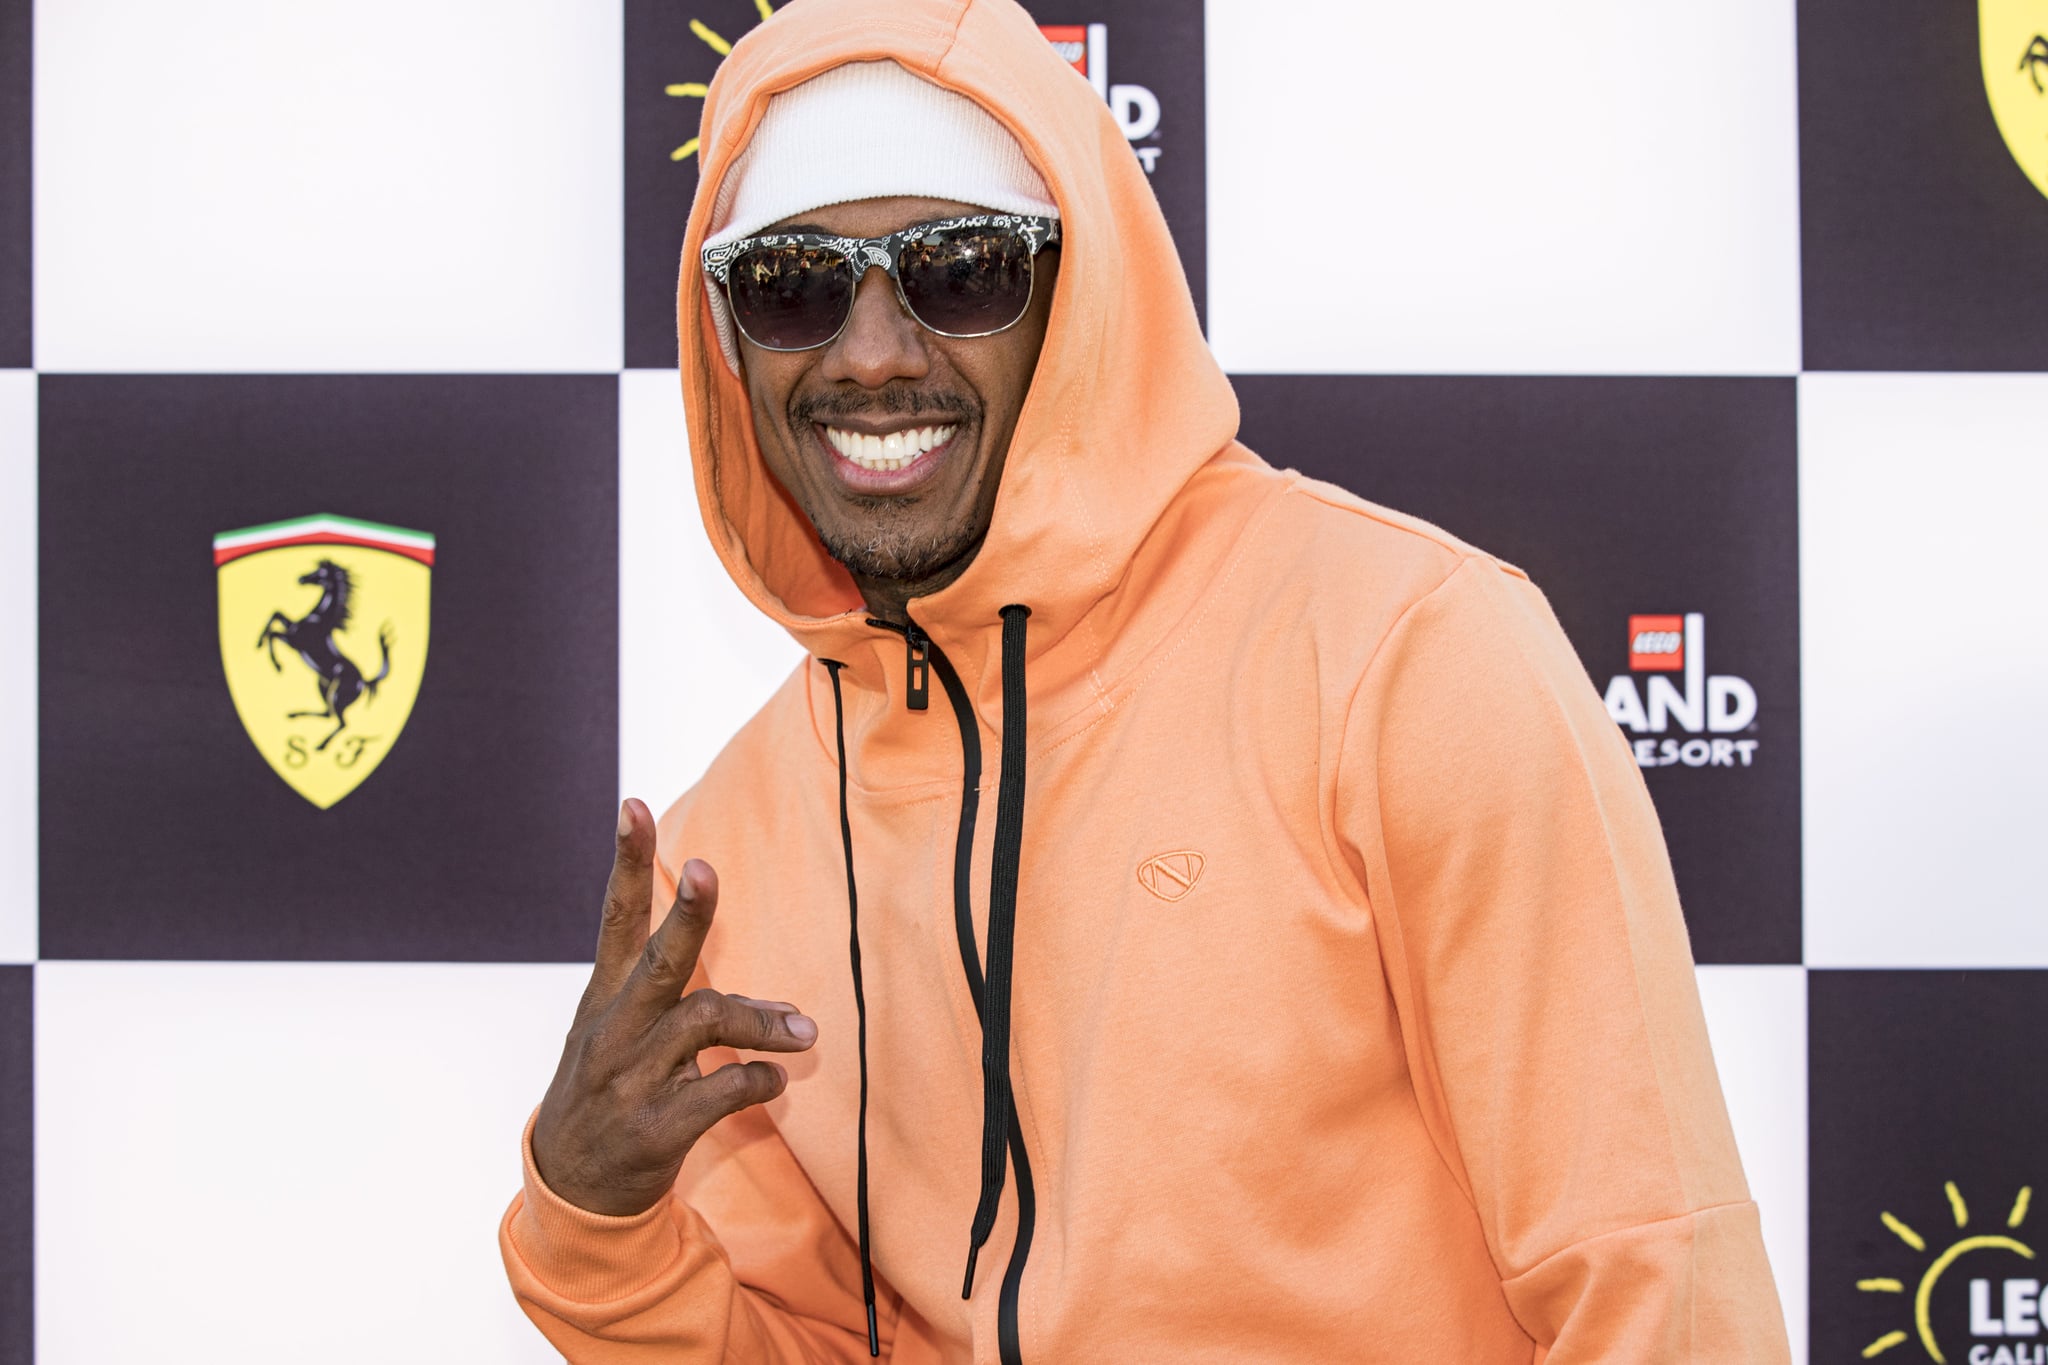 CARLSBAD, CALIFORNIA - MAY 11: Entertainer Nick Cannon poses for photos at LEGOLAND California on May 11, 2022 in Carlsbad, California. (Photo by Daniel Knighton/Getty Images)